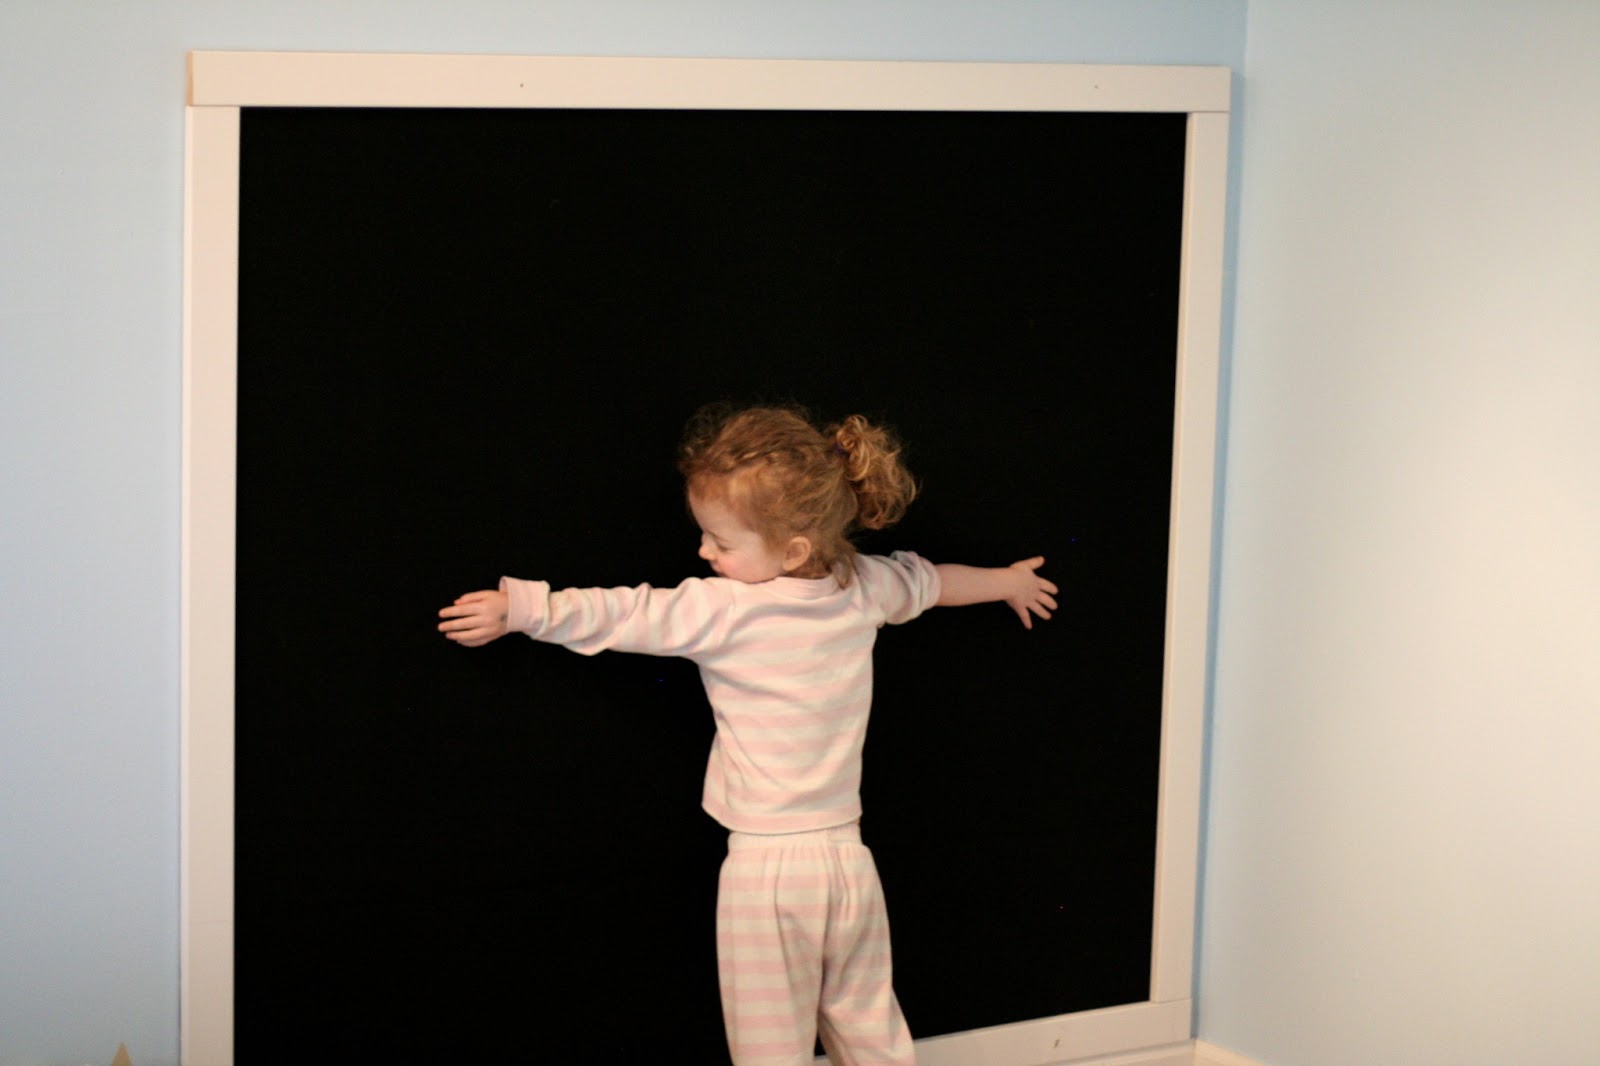 The felt notice board by Pergamy can be used with velcro